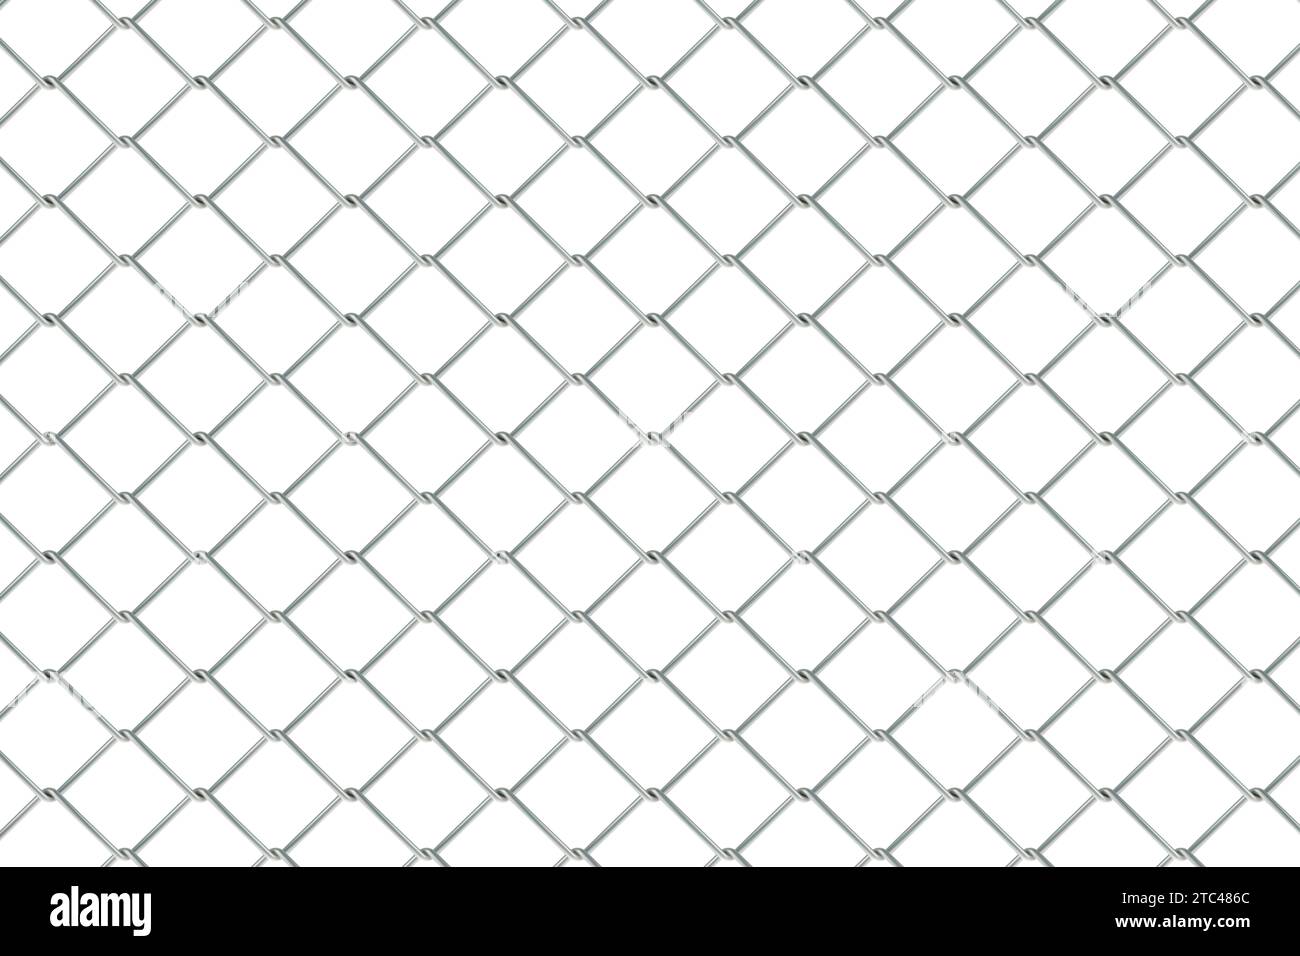 Wired fence pattern, metal grid on white backdrop, 3D rendering Stock Photo